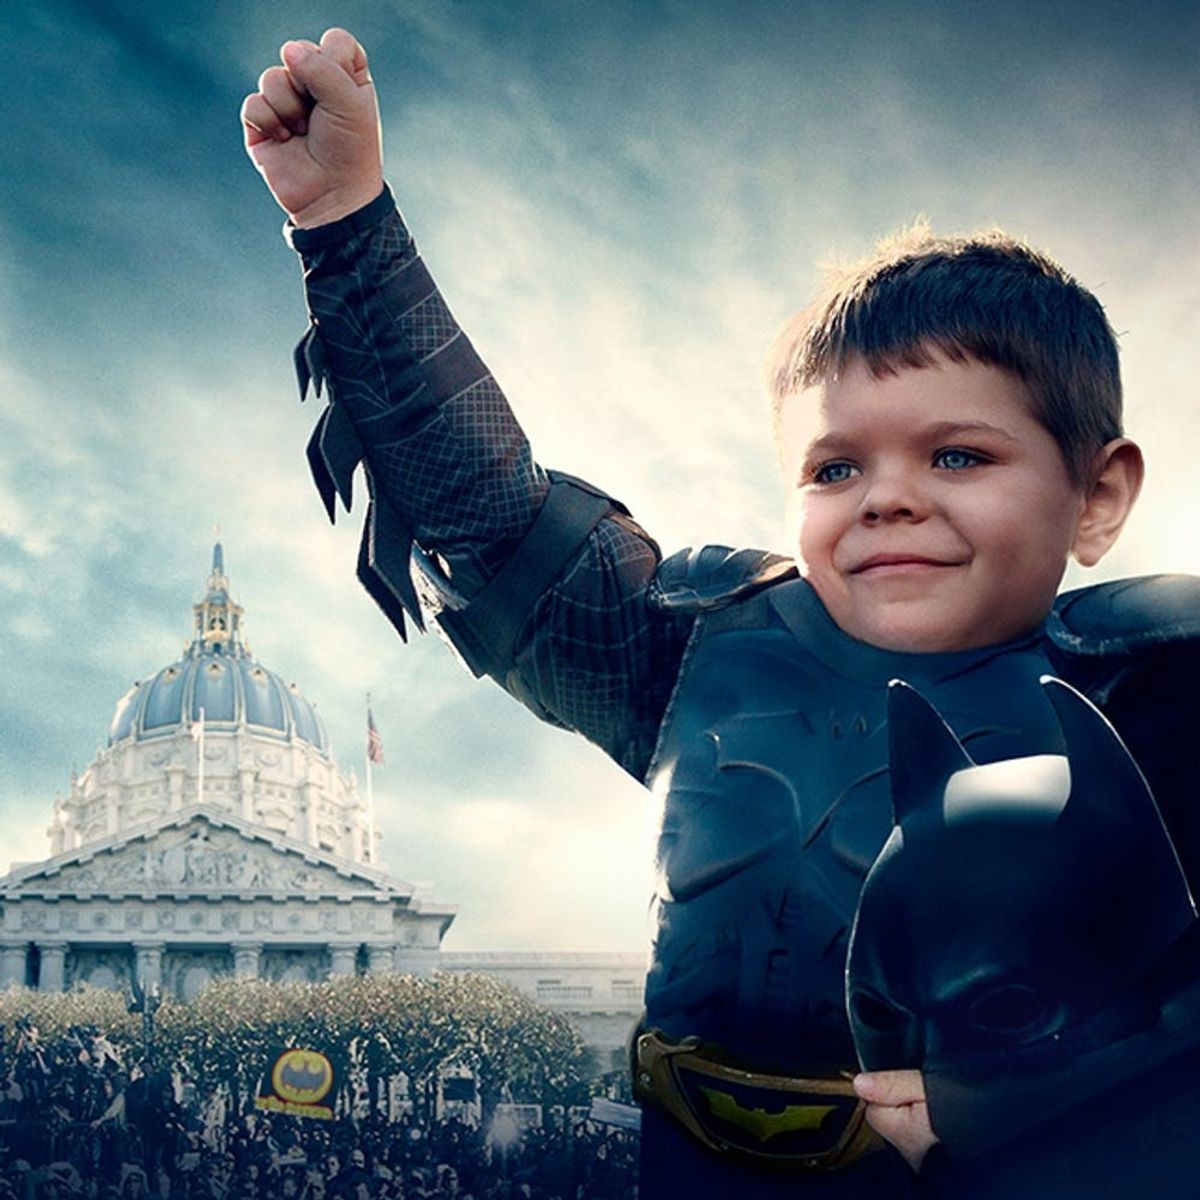 Watch the Official Batkid Movie Trailer for All the Feels